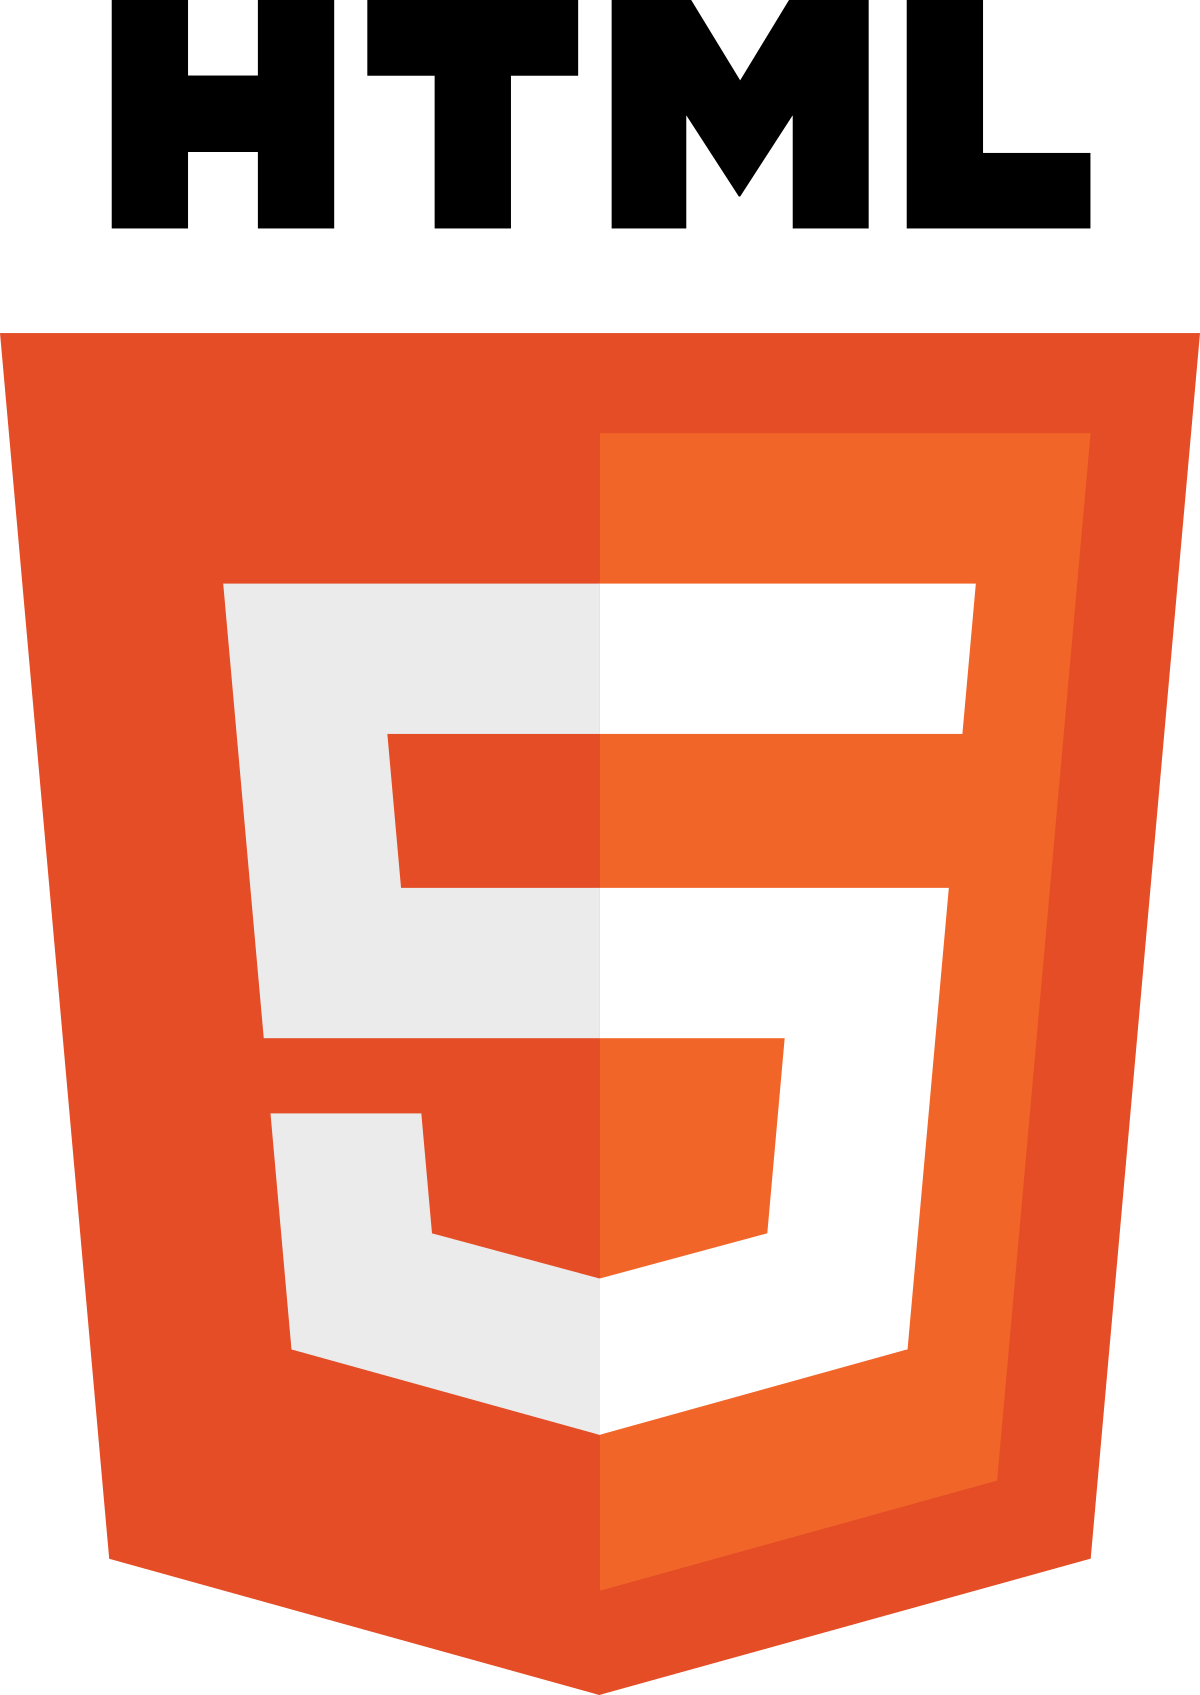 Symphysis Marketing has Developers who know HTML 5 for startups